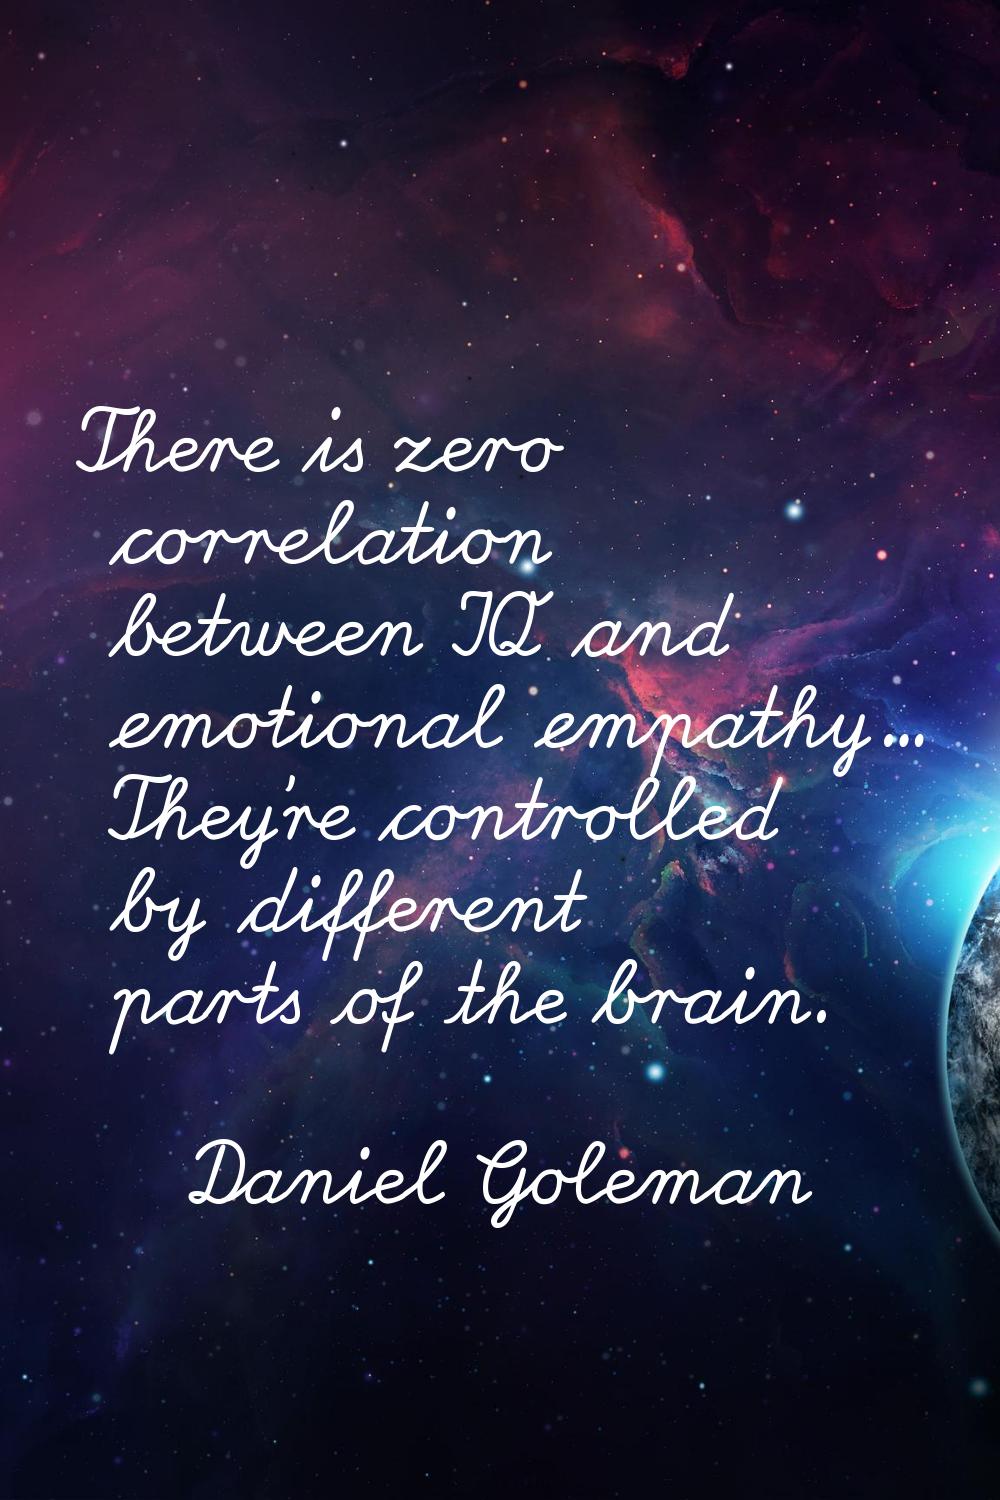 There is zero correlation between IQ and emotional empathy... They're controlled by different parts